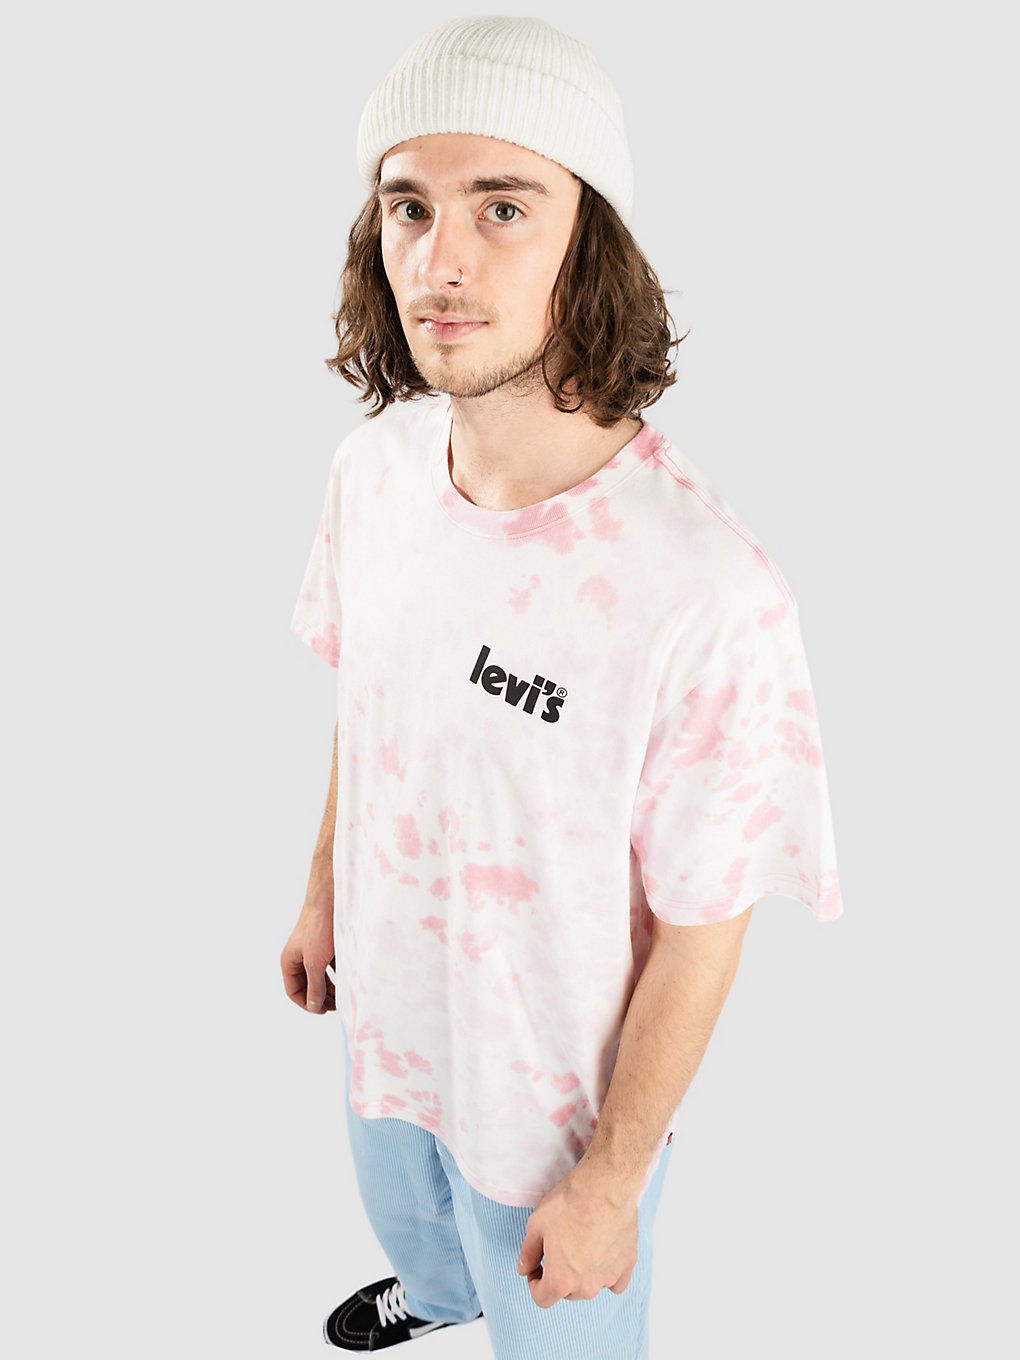 Levi's Relaxed Fit Reds T-Shirt poster pink dye kaufen